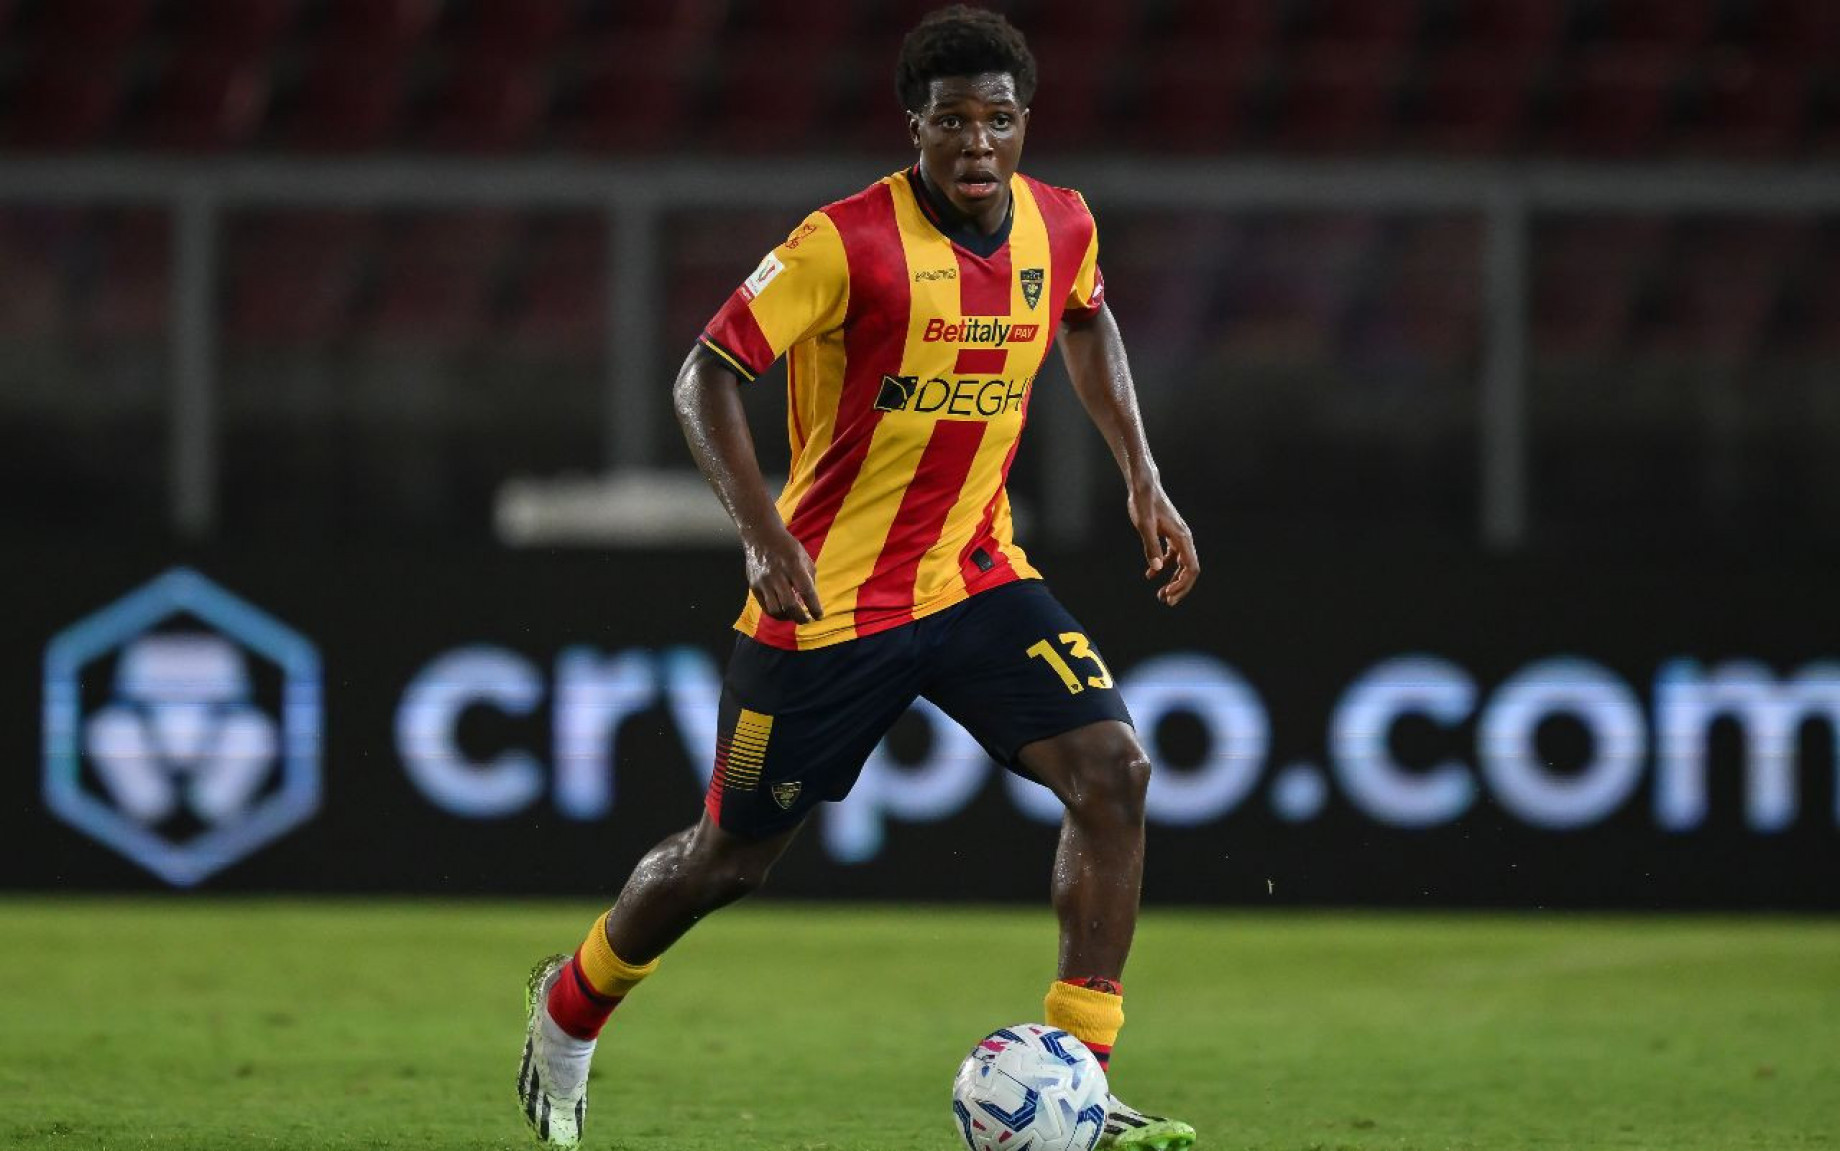 Lecce left-back Patrick Dorgu revealed that his dream is to join Chelsea amid interest from several European clubs.